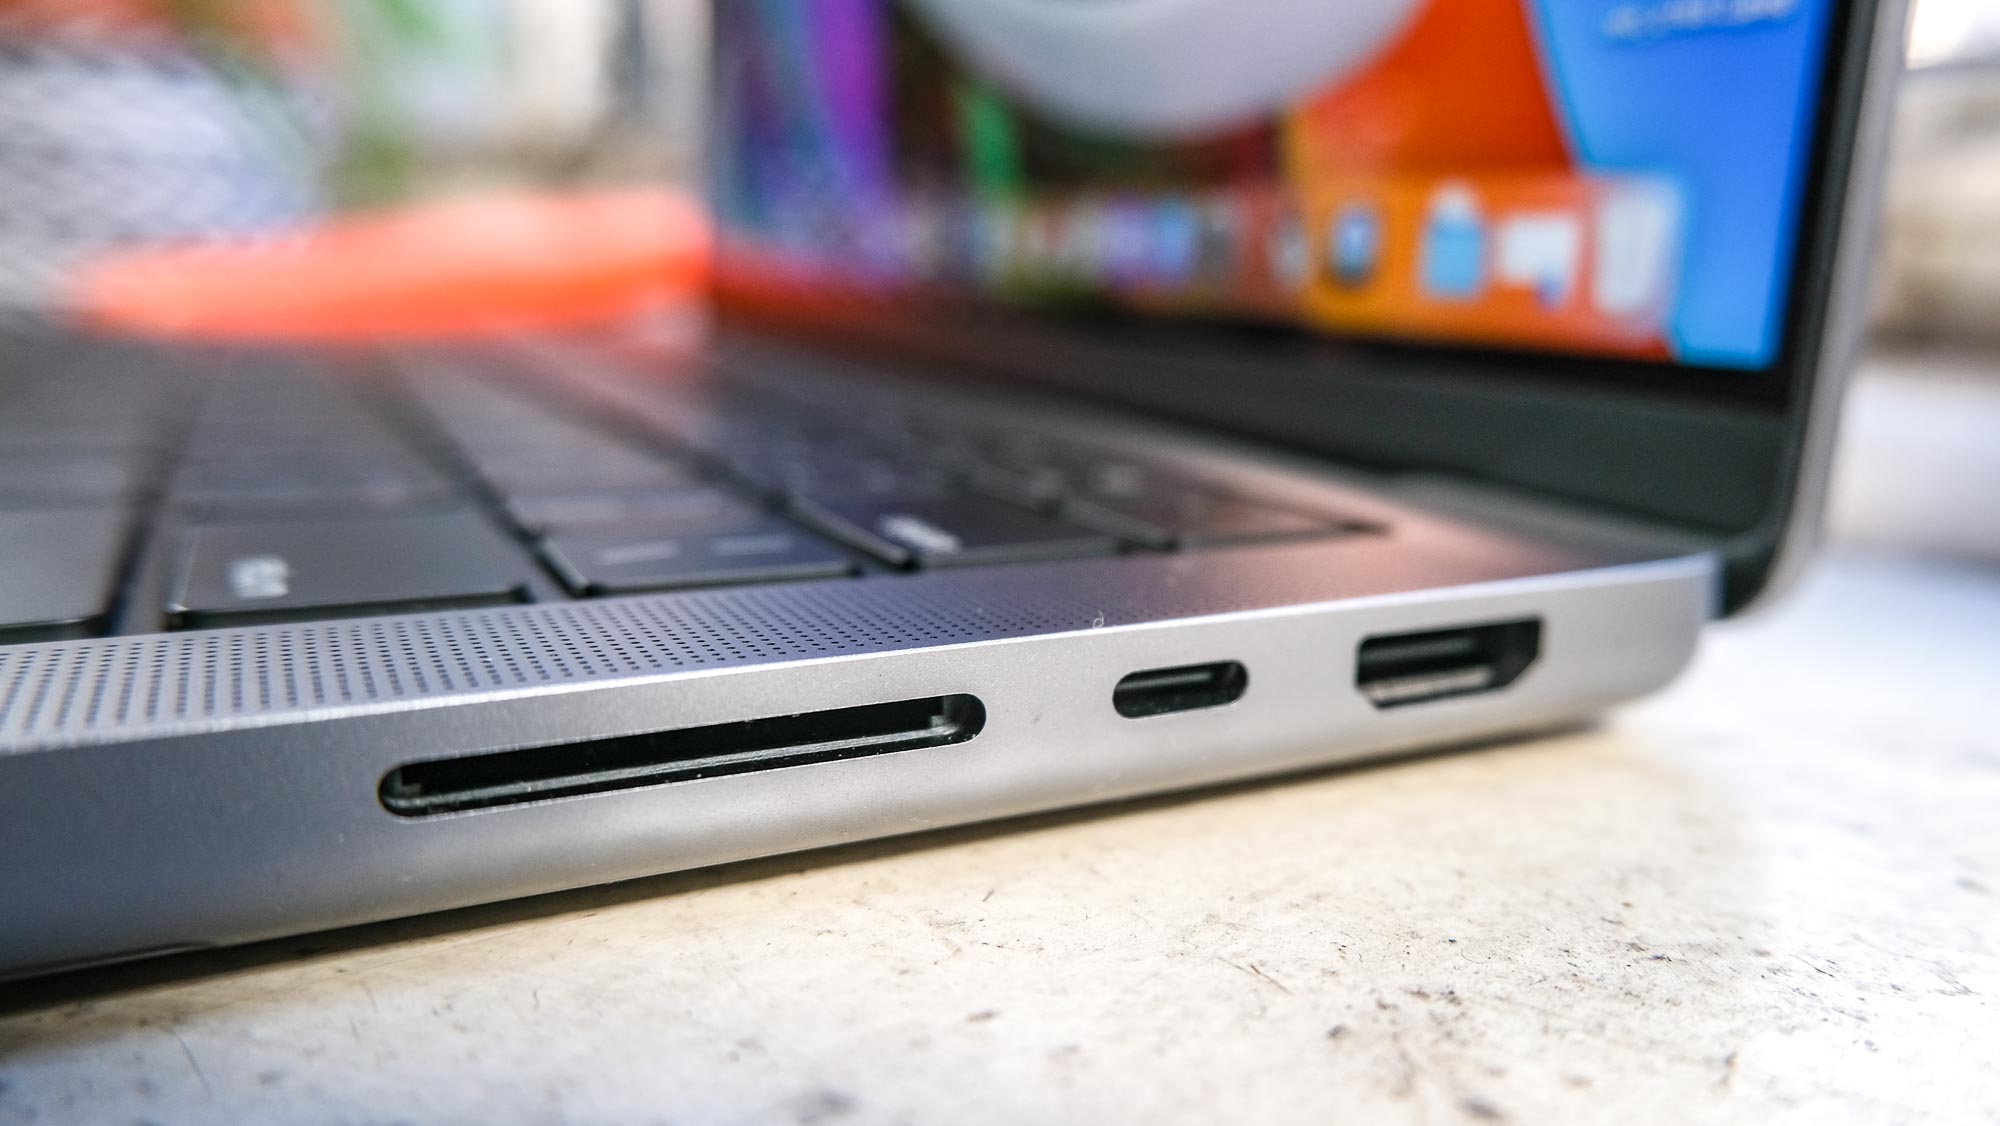 The MacBook Pro 2021 (14-inch)'s SD memory reader, third Thunderbolt 4 port and HDMI-out